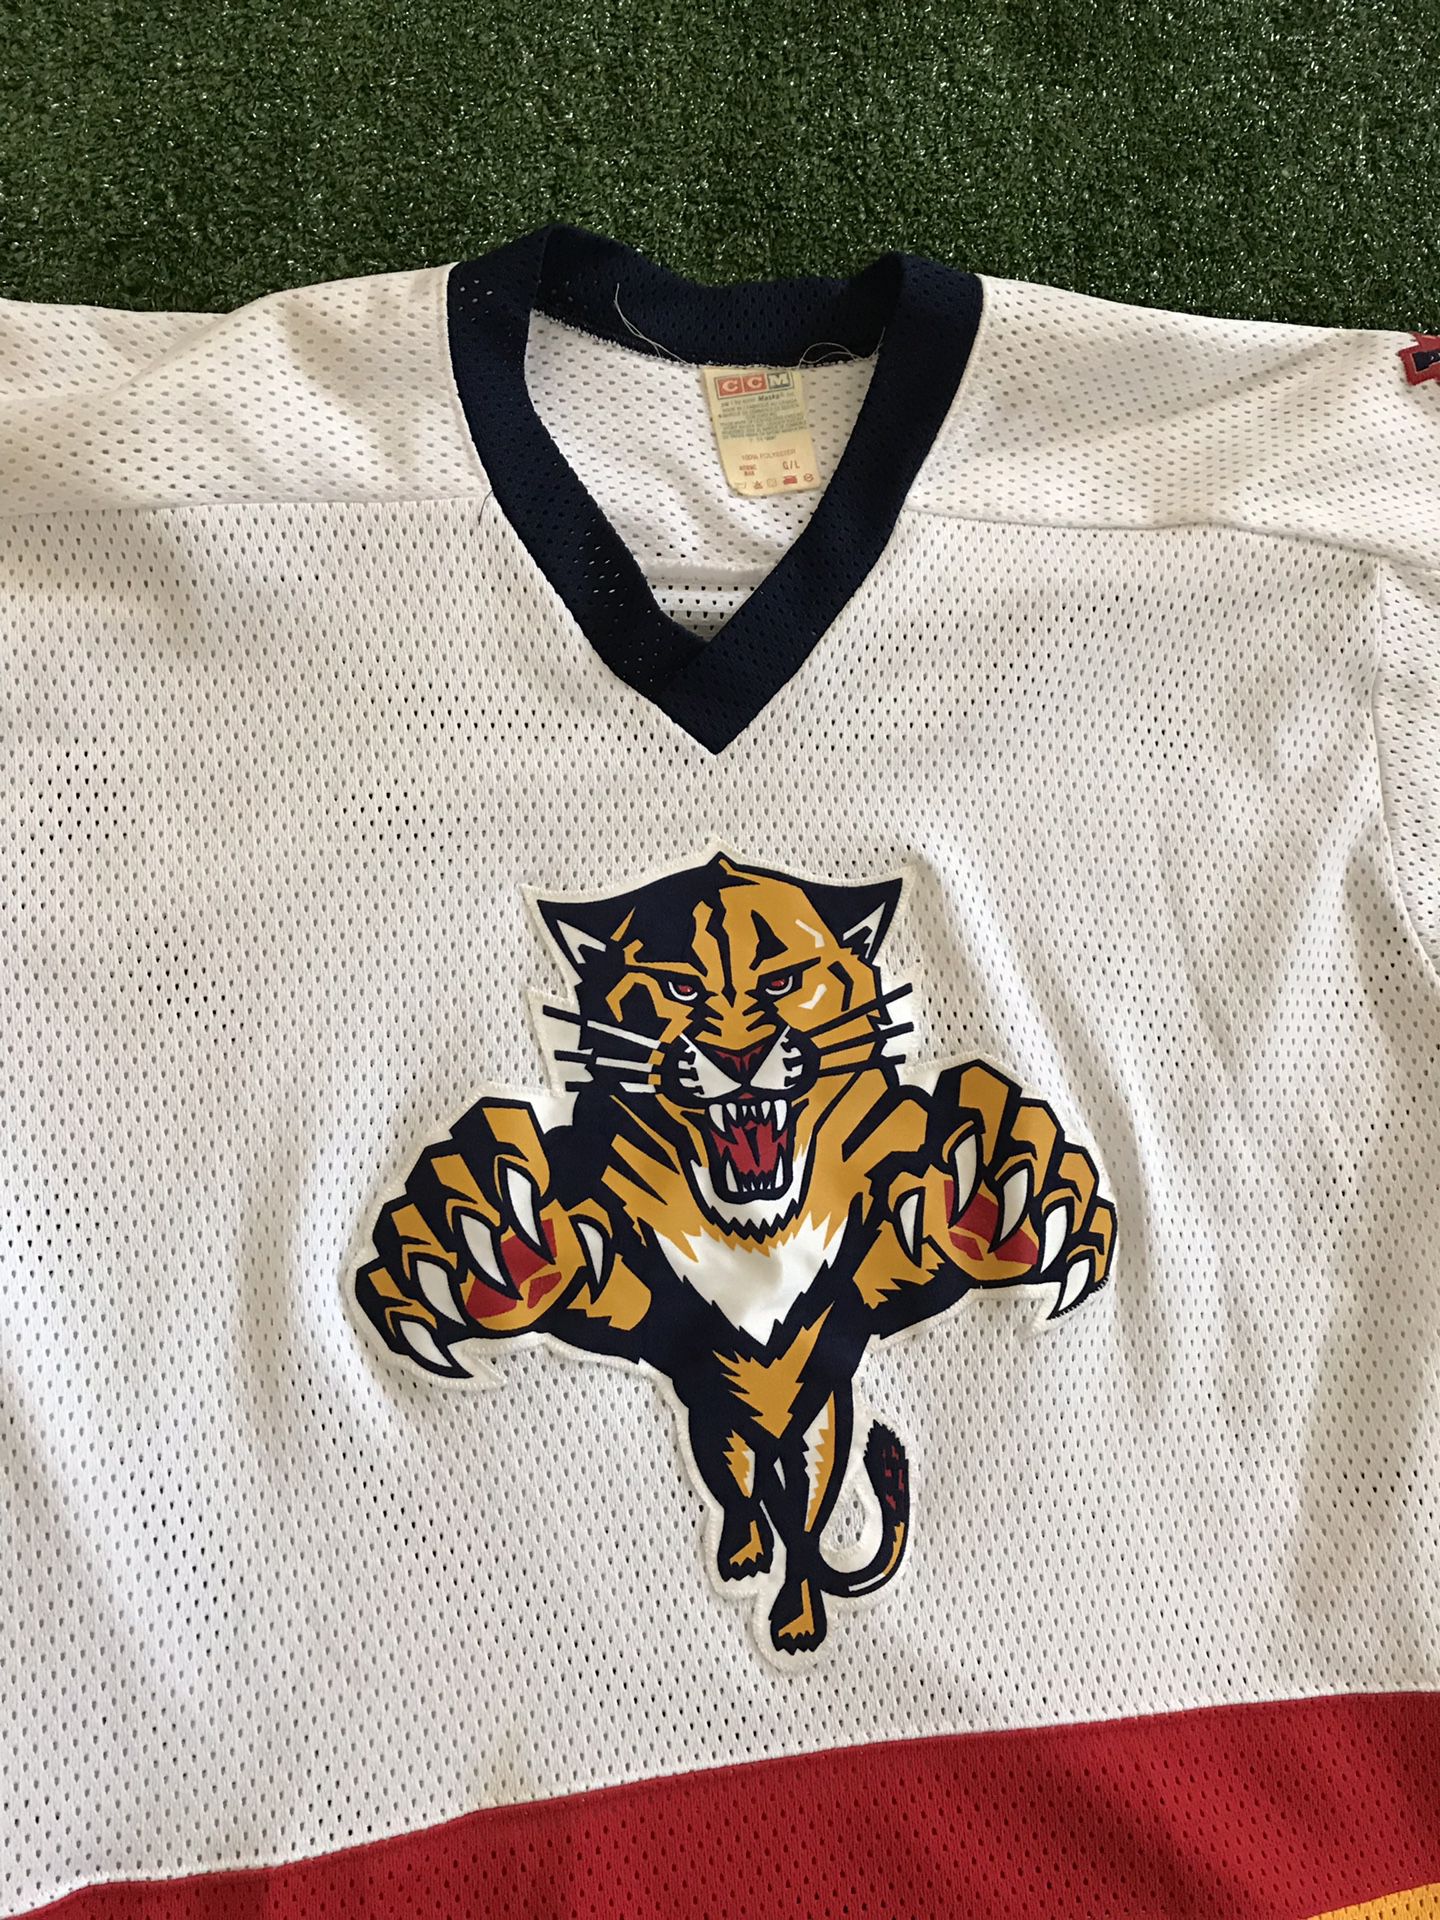 Authentic Vintage CCM NHL Florida Panthers Hockey Jersey Red Away Blank for  Sale in Miami, FL - OfferUp